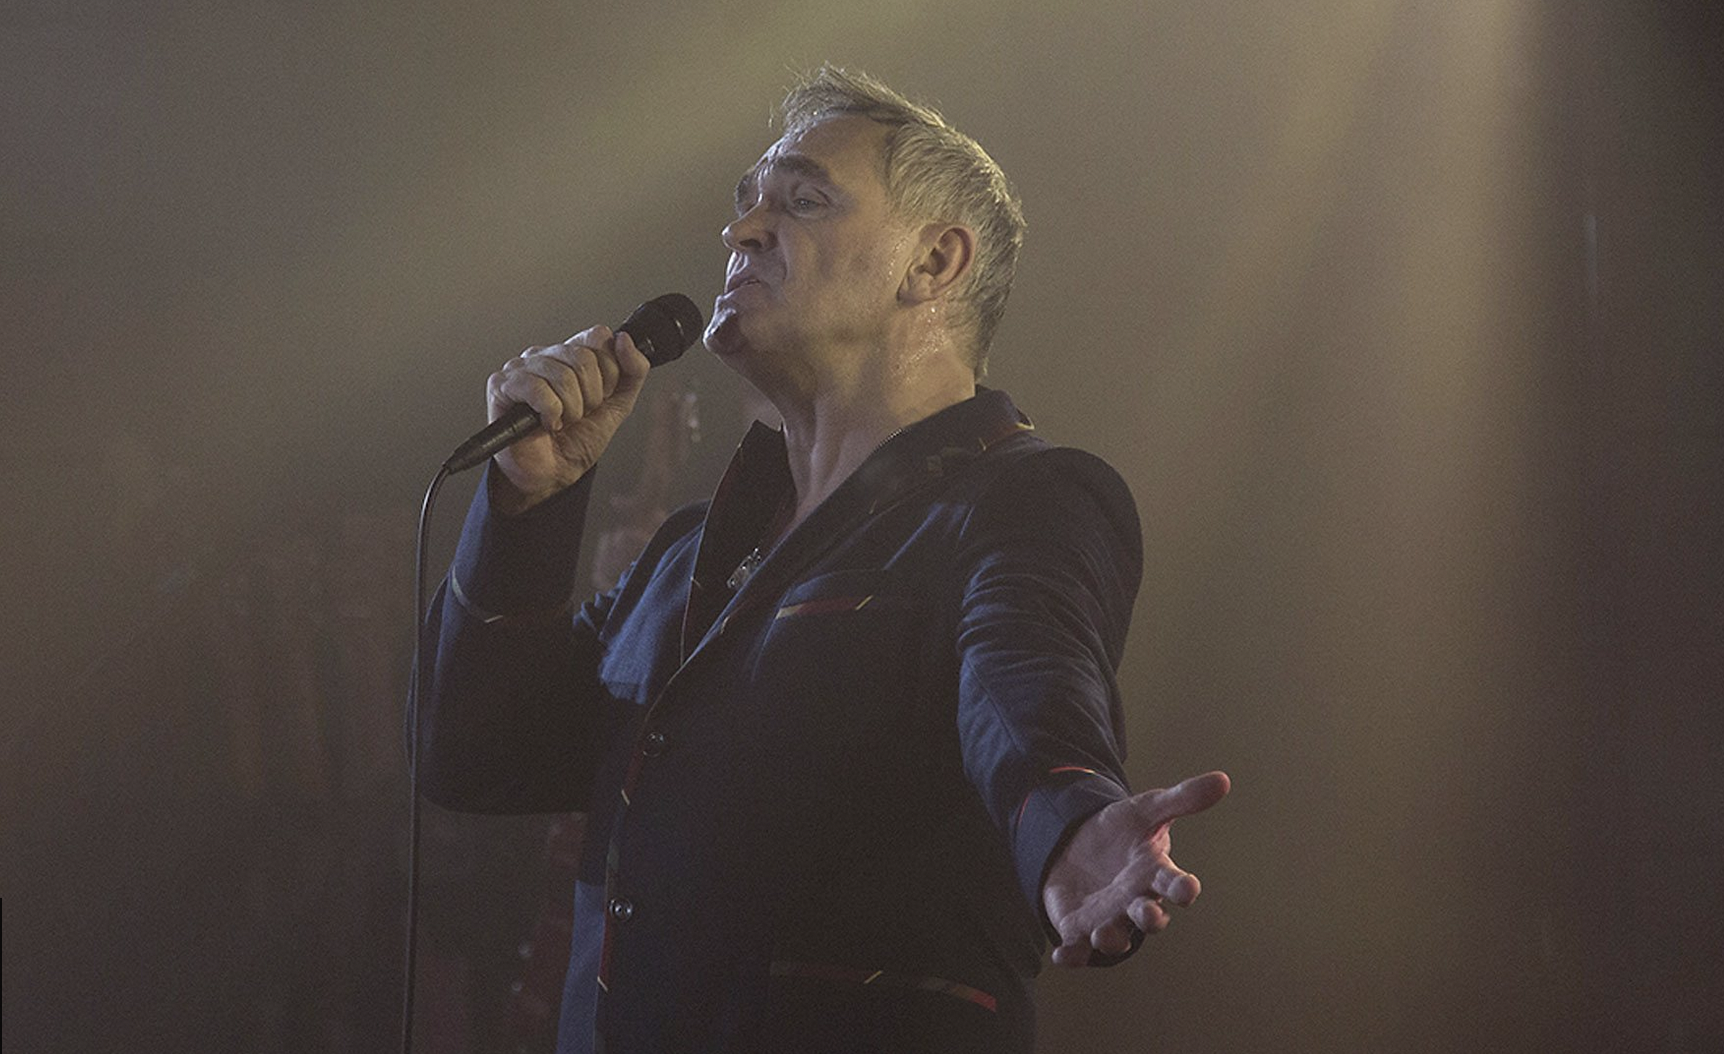 Morrissey gig review